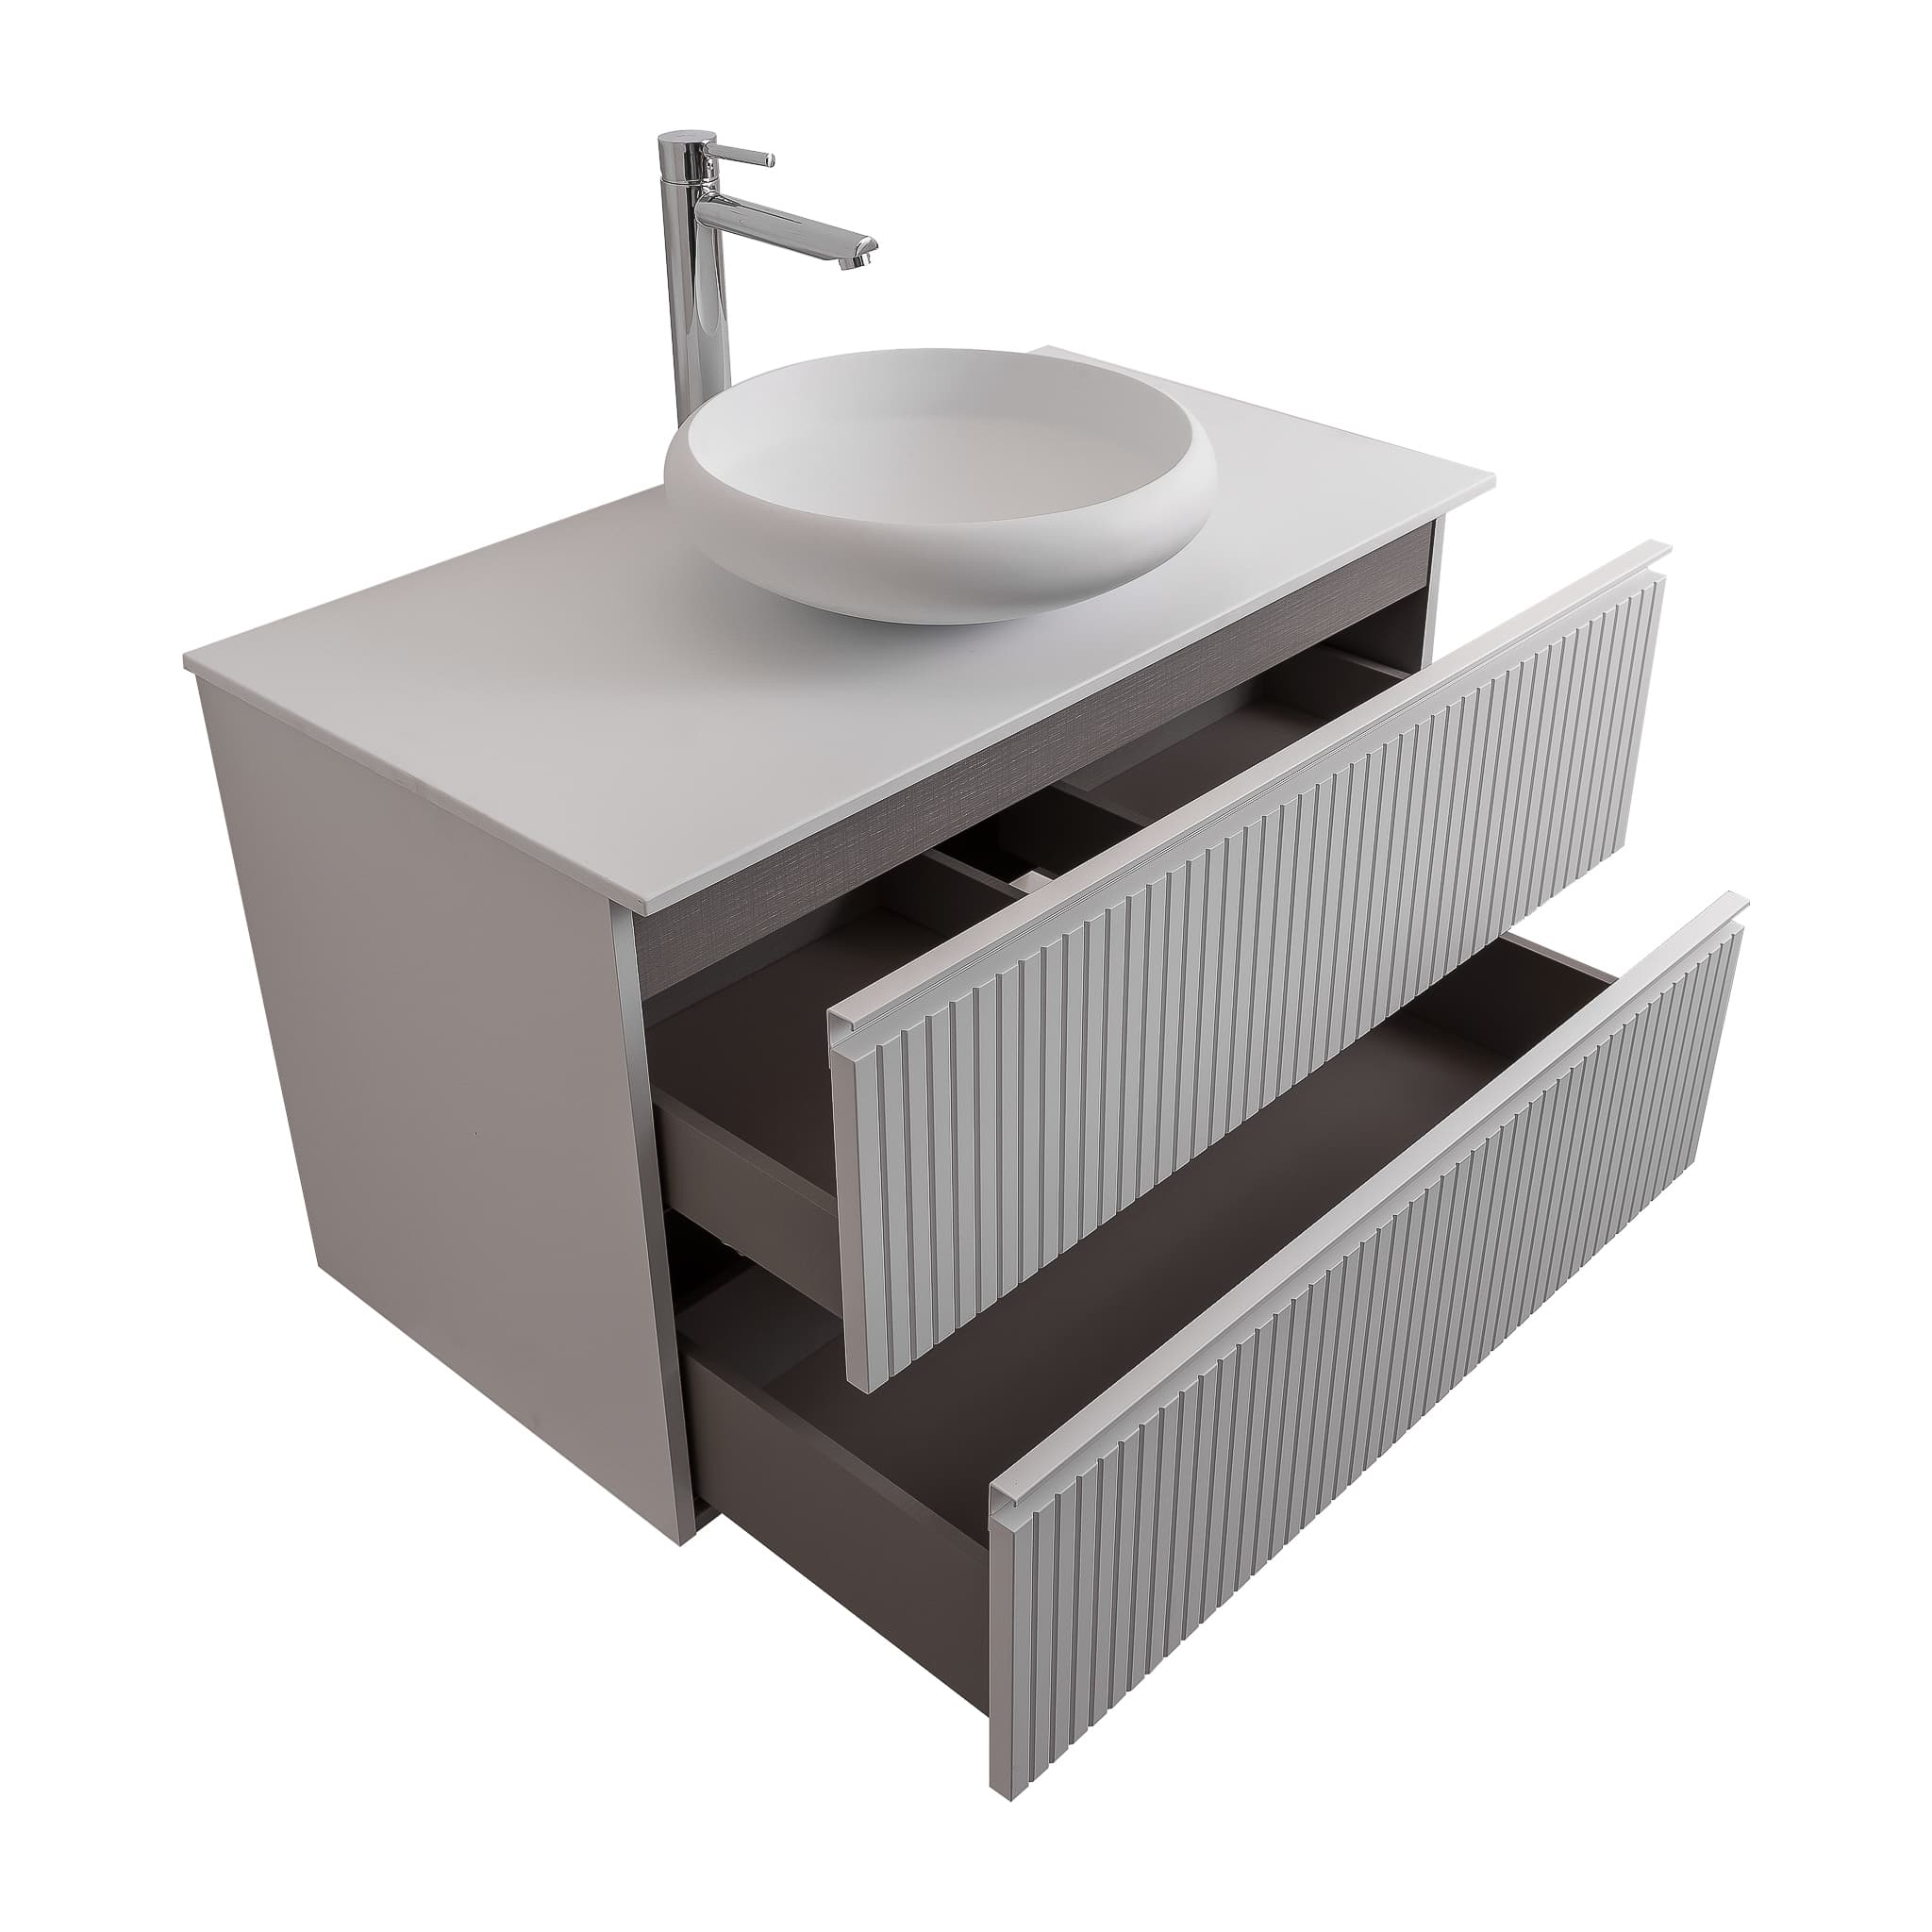 Ares 39.5 Matte White Cabinet, Solid Surface Flat White Counter And Round Solid Surface White Basin 1153, Wall Mounted Modern Vanity Set